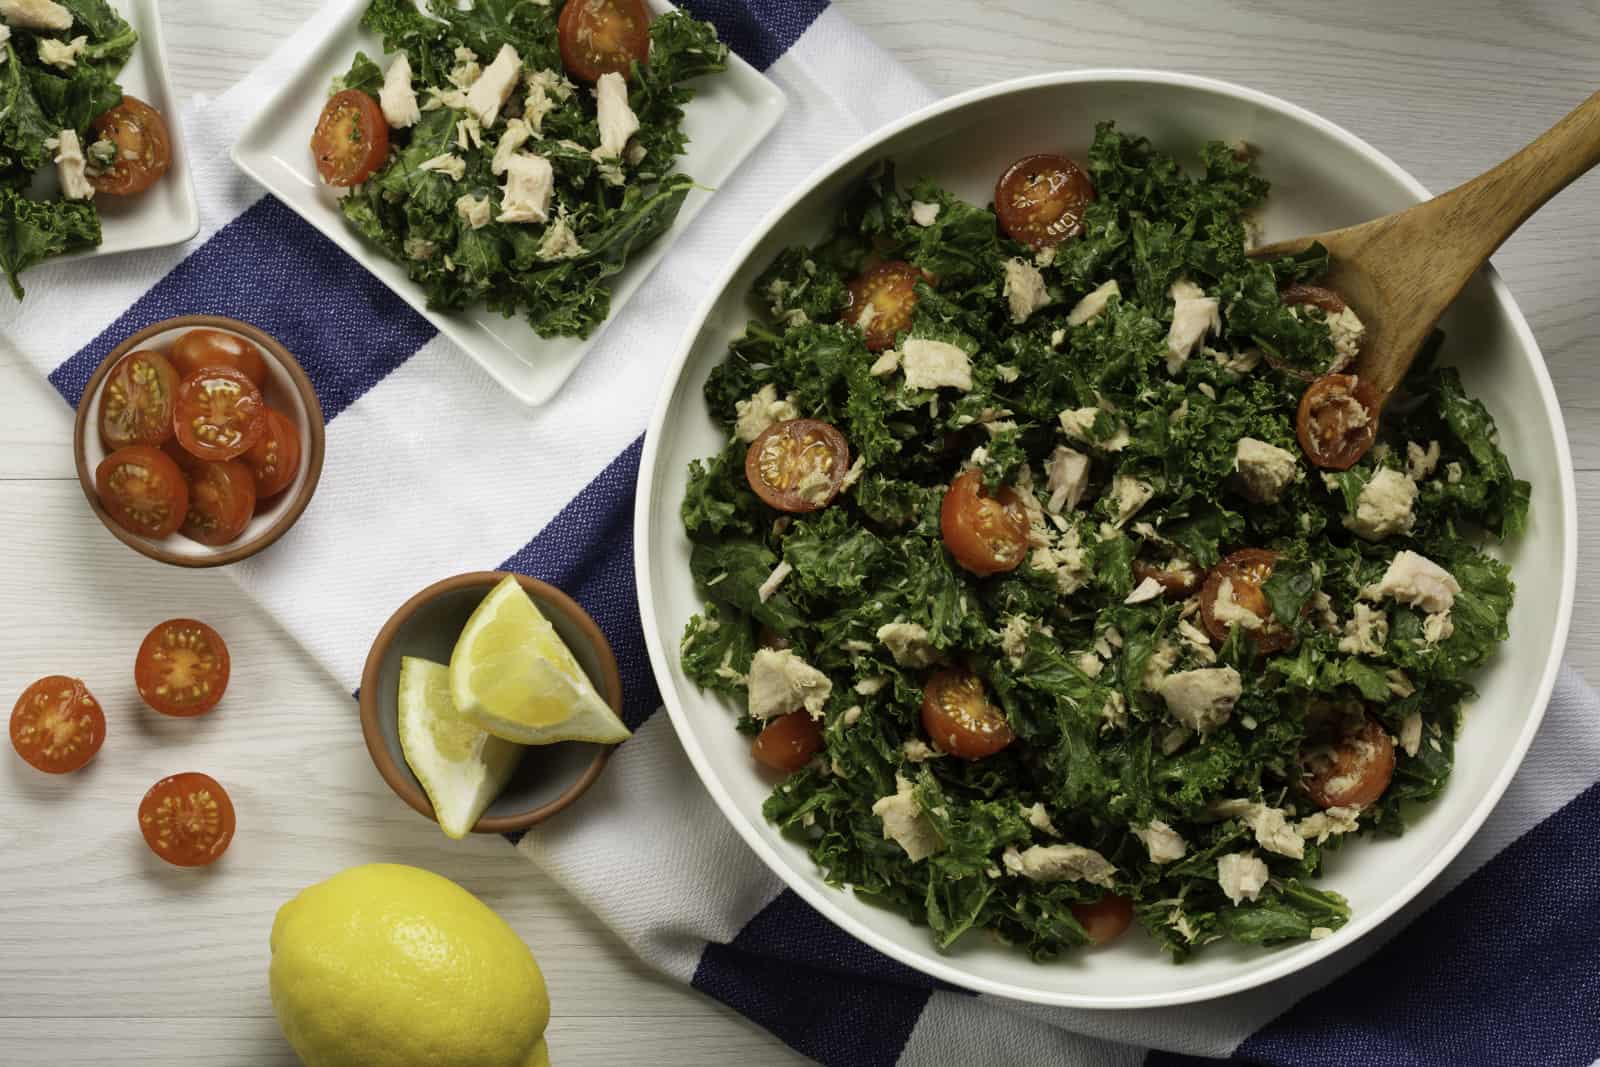 Find this Kale and Tuna Salad plus more creative and unique recipes for canned tuna and salmon in this recipe roundup from Street Smart Nutrition and Seafood Nutrition Partnership!